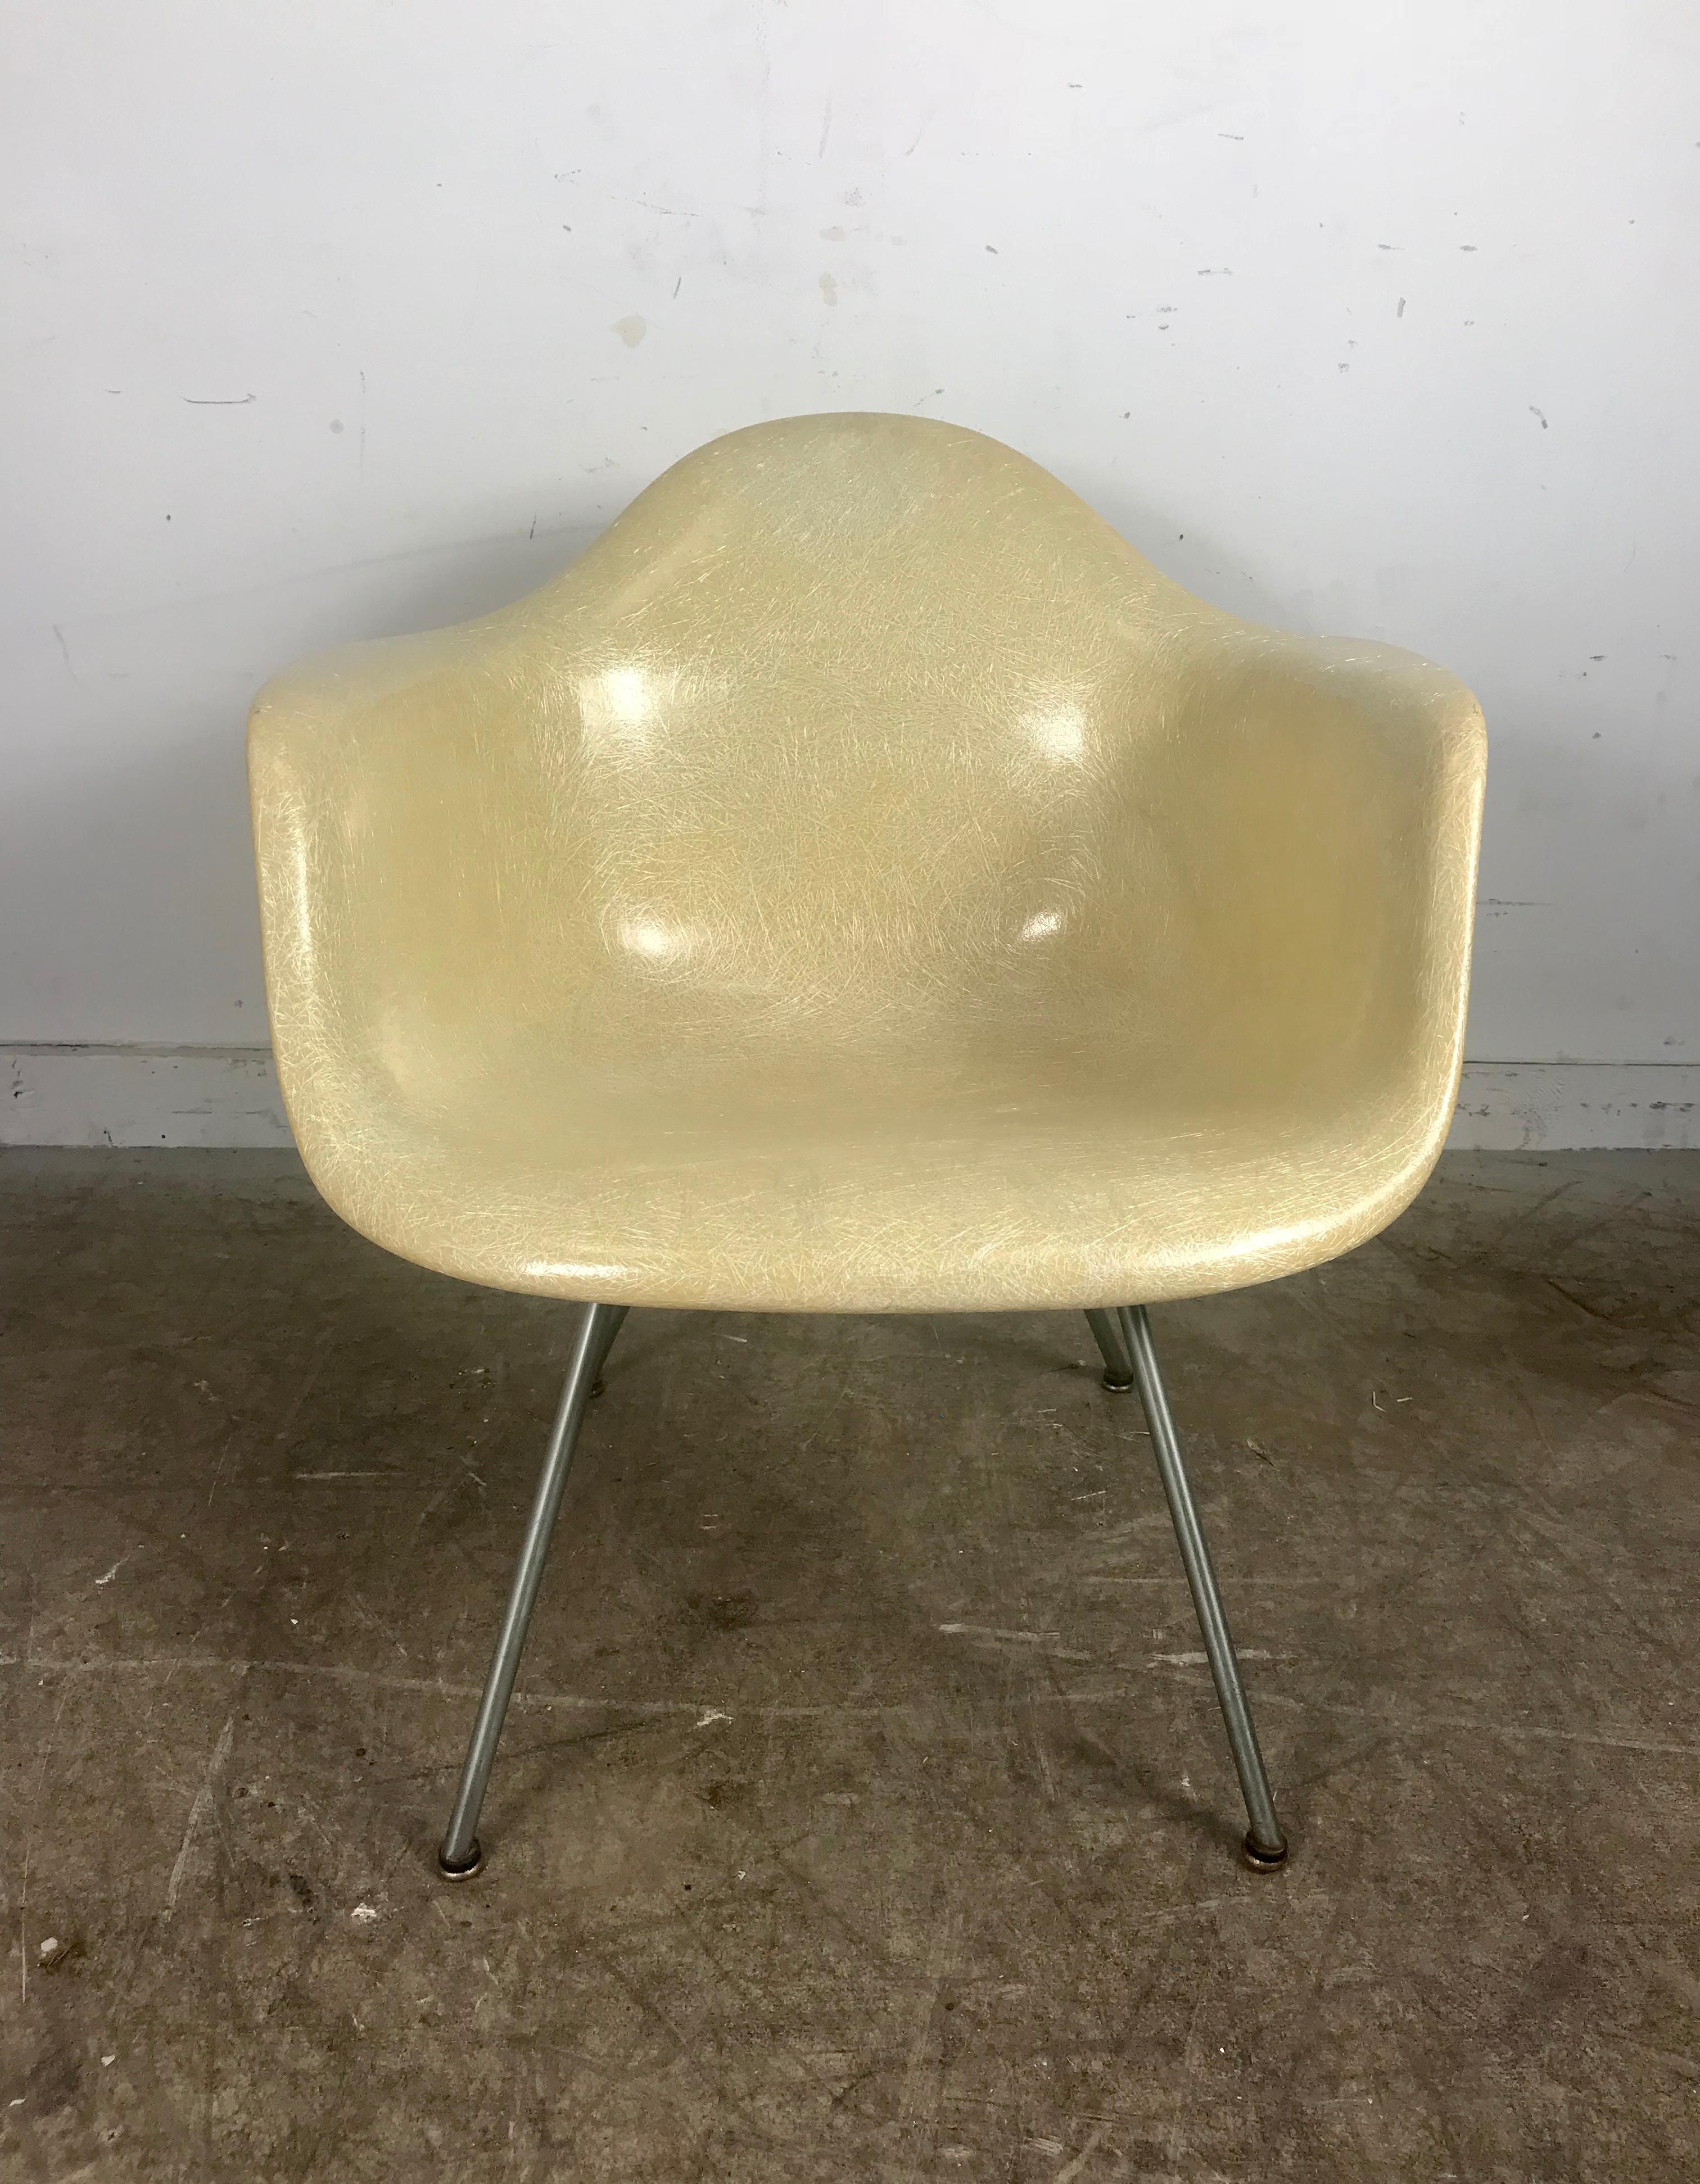 Early 2nd generation X base translucent arm shell lounge chair by Charles Eames for Herman Miller. Amazing condition, featuring low aluminum X base, large domes of silence shock mounts. Retains all four early foot glides, see through translucent